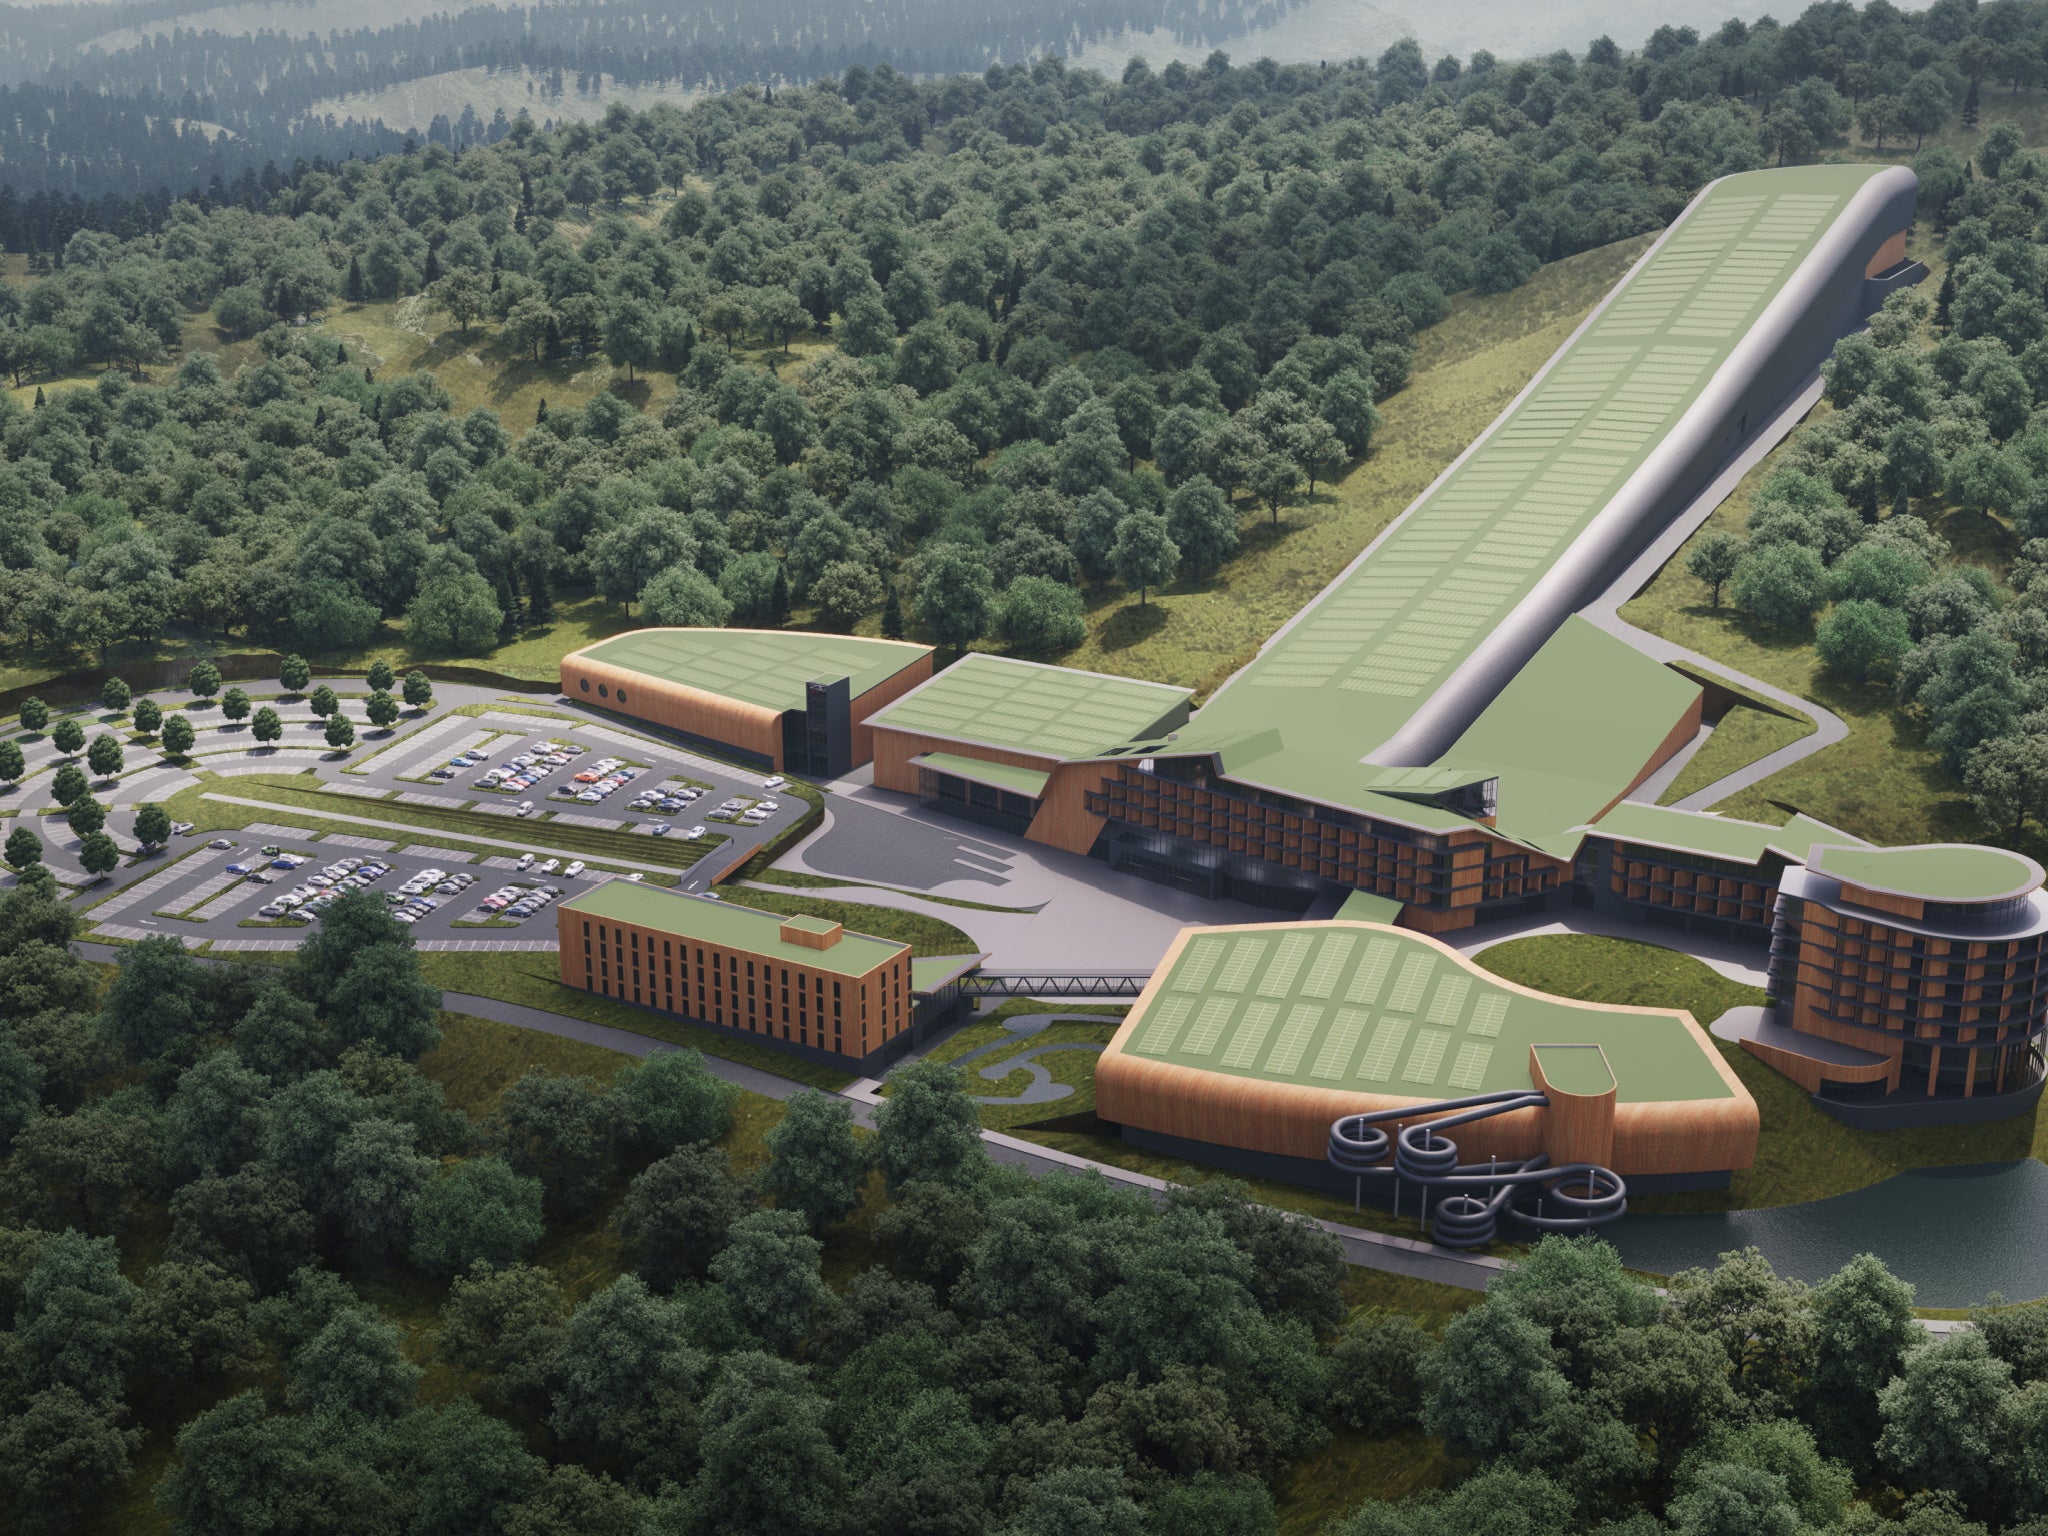 Rhydycar West will feature a world-class snow centre, including the longest multi-run indoor ski slope in the UK